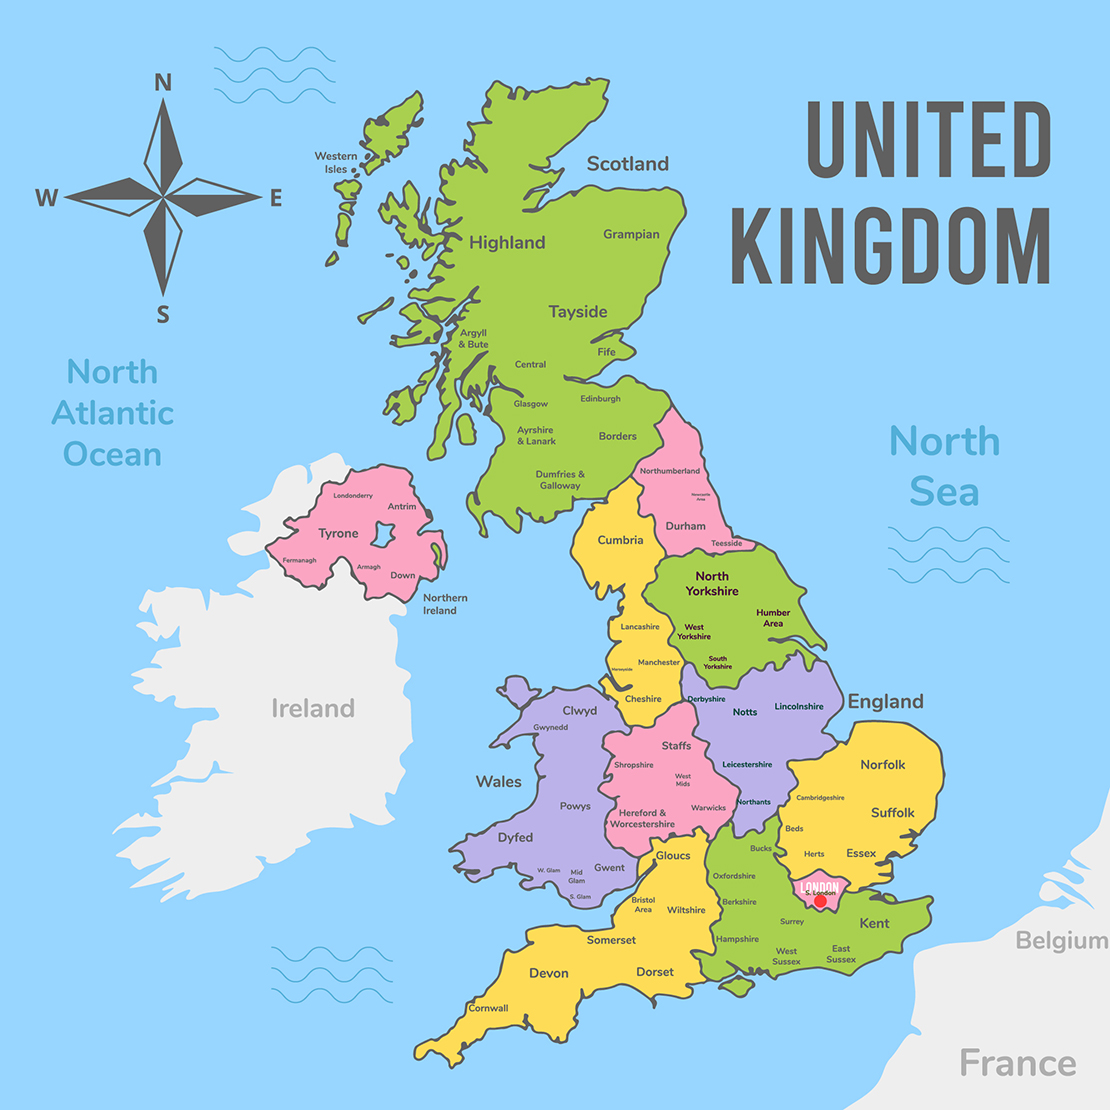 UK Map of fulfilment centres